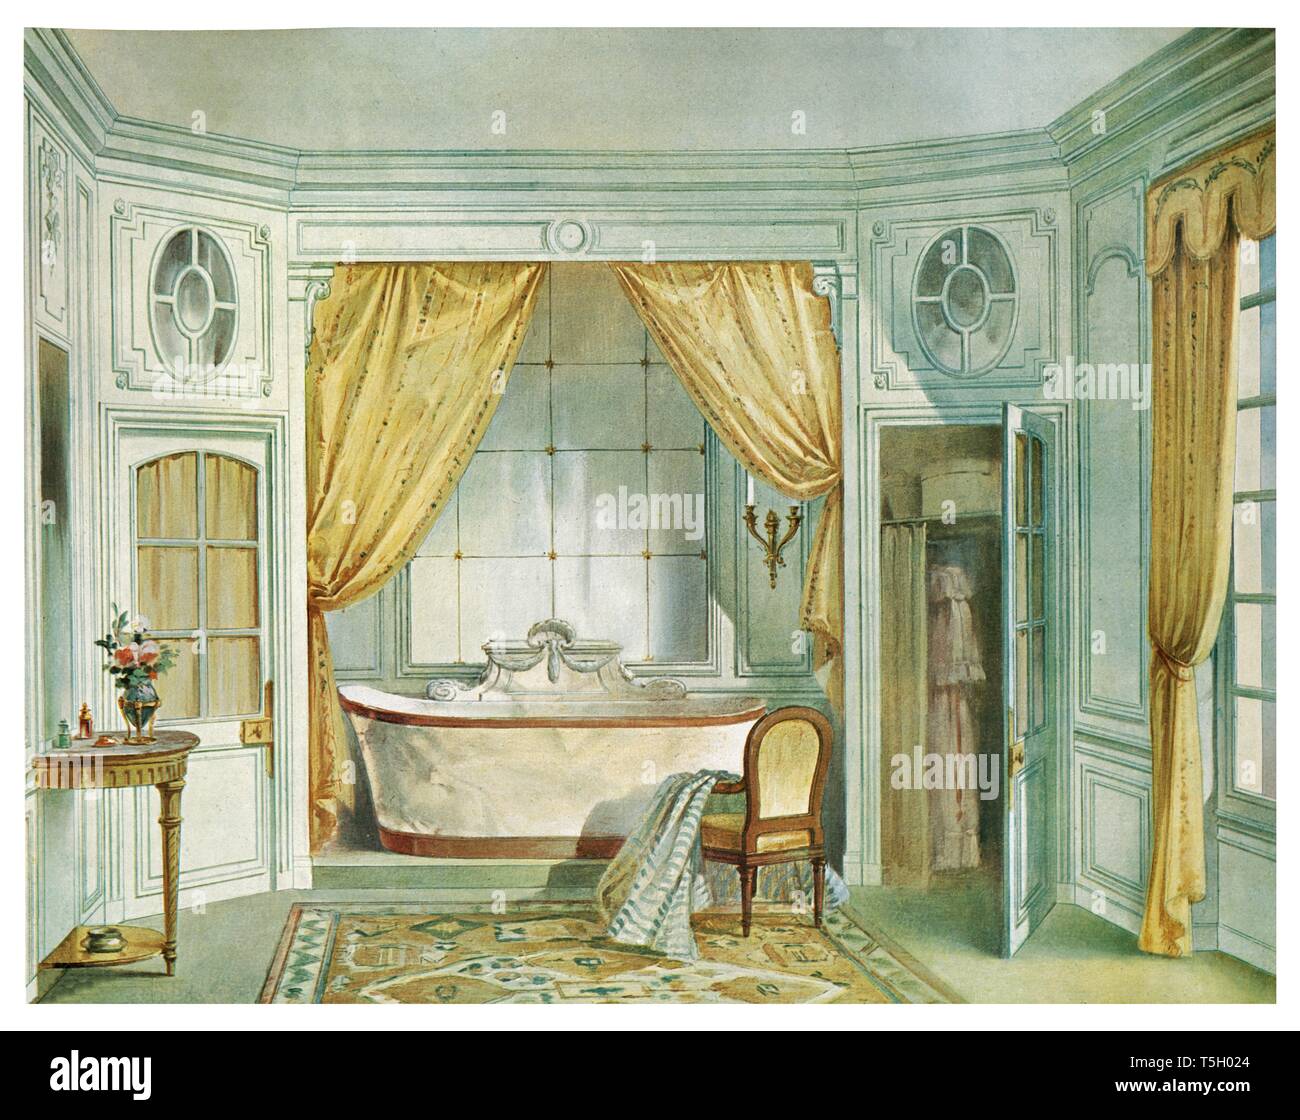 Bathroom Louis Xvi Style In A Niche With Tub Big Glass And